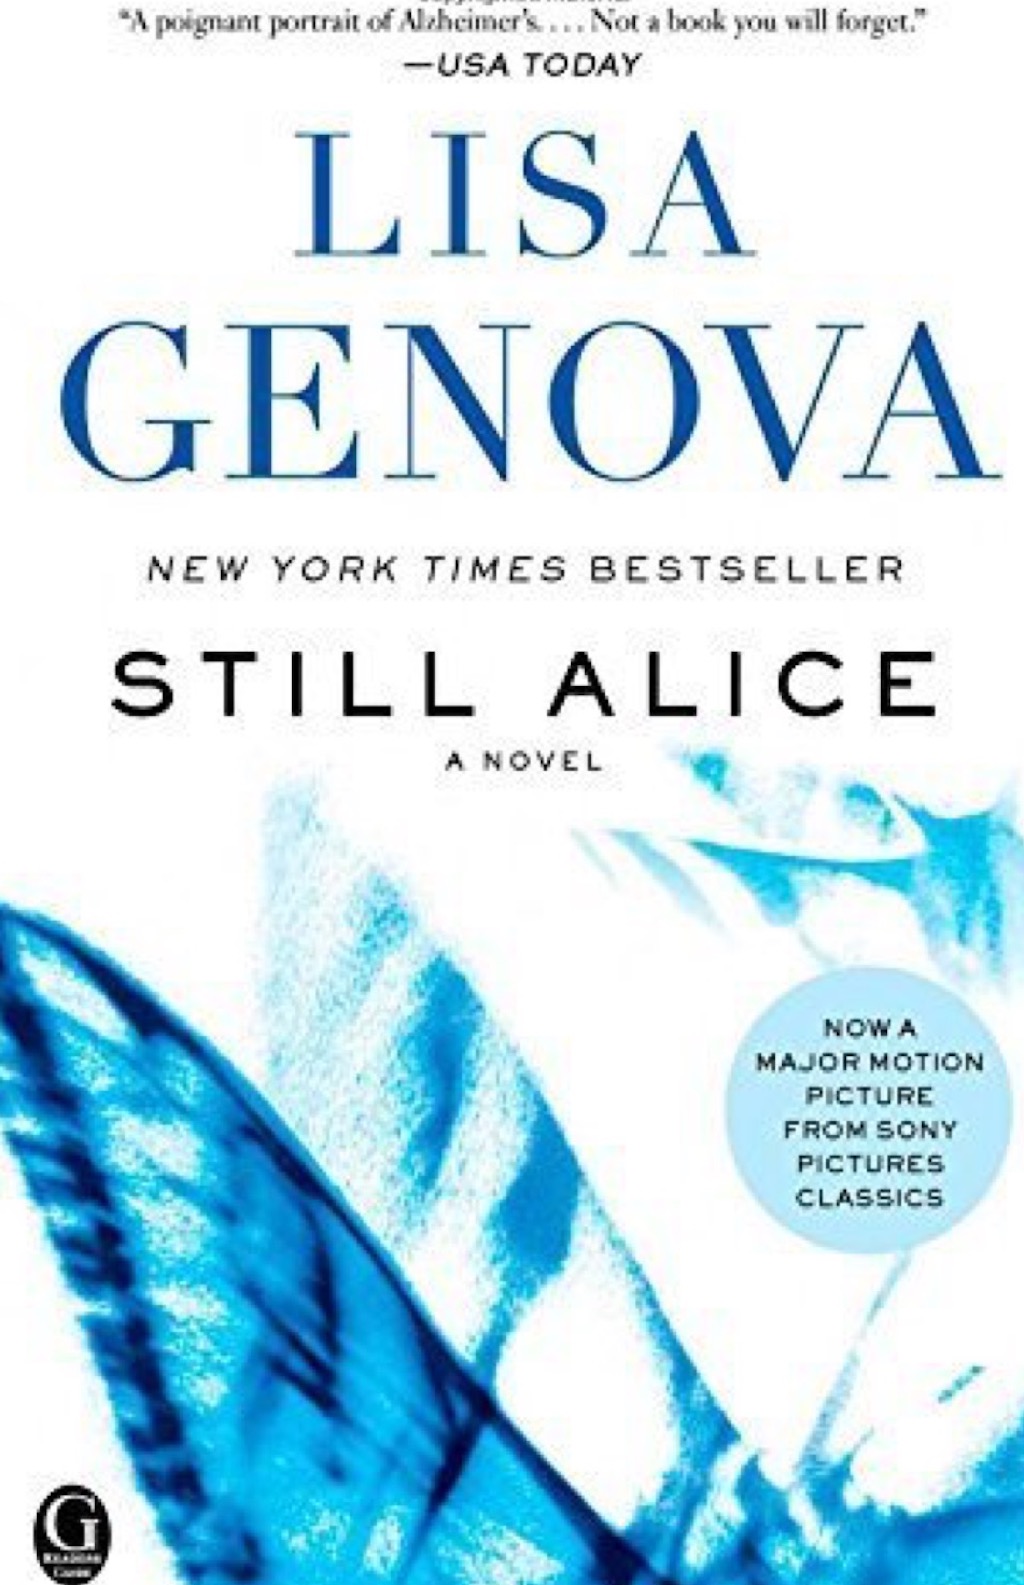 Still Alice by Lisa Genova books every woman should read in her 40s